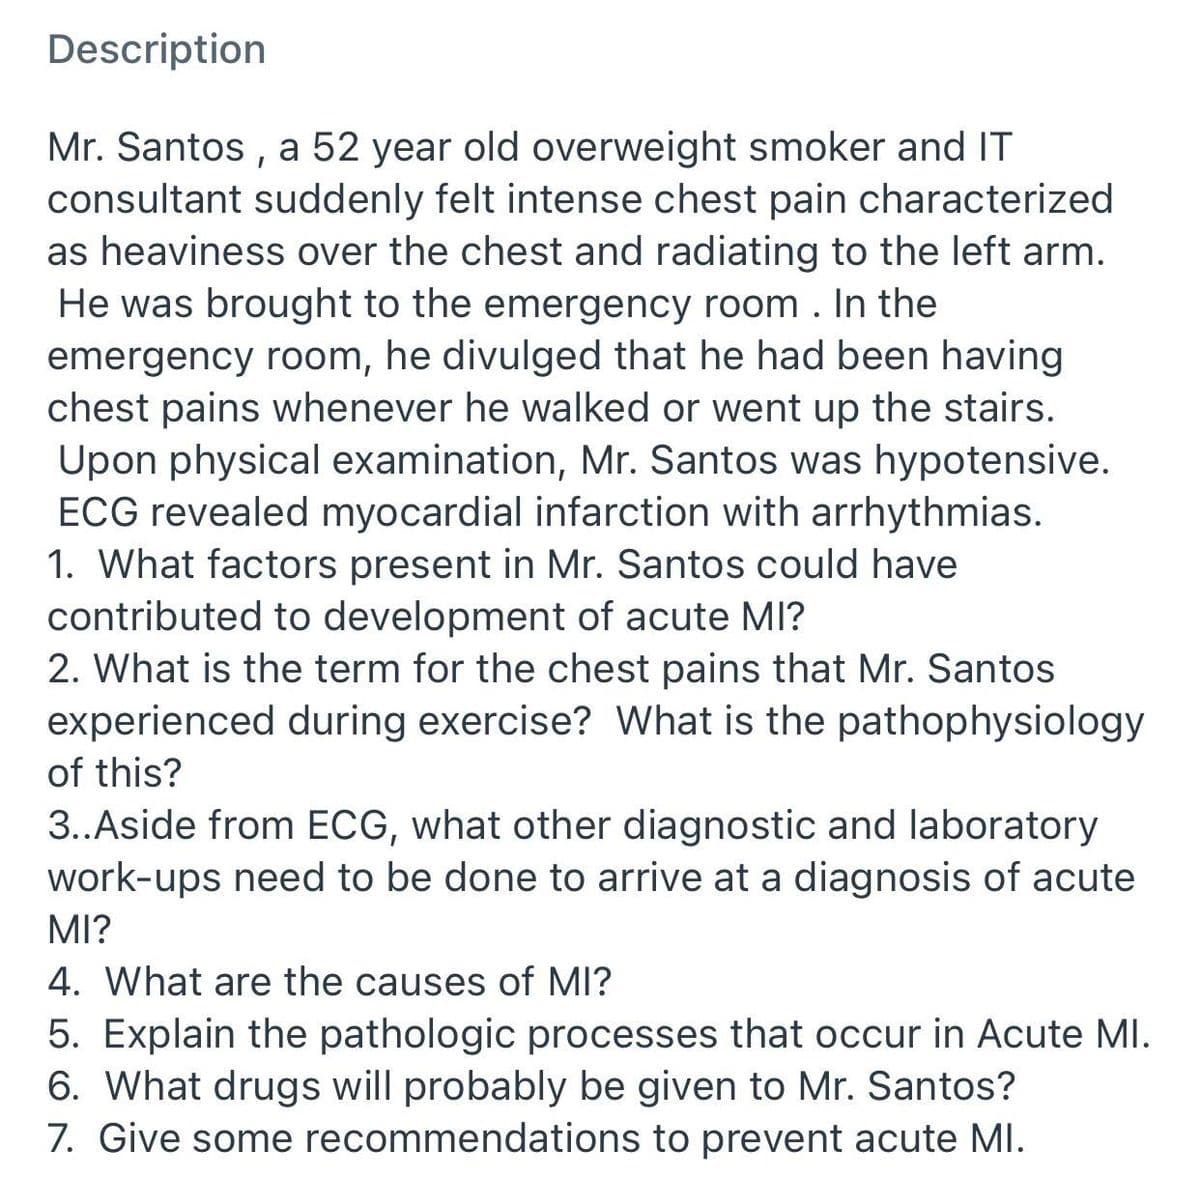 Description
Mr. Santos , a 52 year old overweight smoker and IT
consultant suddenly felt intense chest pain characterized
as heaviness over the chest and radiating to the left arm.
He was brought to the emergency room. In the
emergency room, he divulged that he had been having
chest pains whenever he walked or went up the stairs.
Upon physical examination, Mr. Santos was hypotensive.
ECG revealed myocardial infarction with arrhythmias.
1. What factors present in Mr. Santos could have
contributed to development of acute MI?
2. What is the term for the chest pains that Mr. Santos
experienced during exercise? What is the pathophysiology
of this?
3..Aside from ECG, what other diagnostic and laboratory
work-ups need to be done to arrive at a diagnosis of acute
MI?
4. What are the causes of MI?
5. Explain the pathologic processes that occur in Acute MI.
6. What drugs will probably be given to Mr. Santos?
7. Give some recommendations to prevent acute MI.
